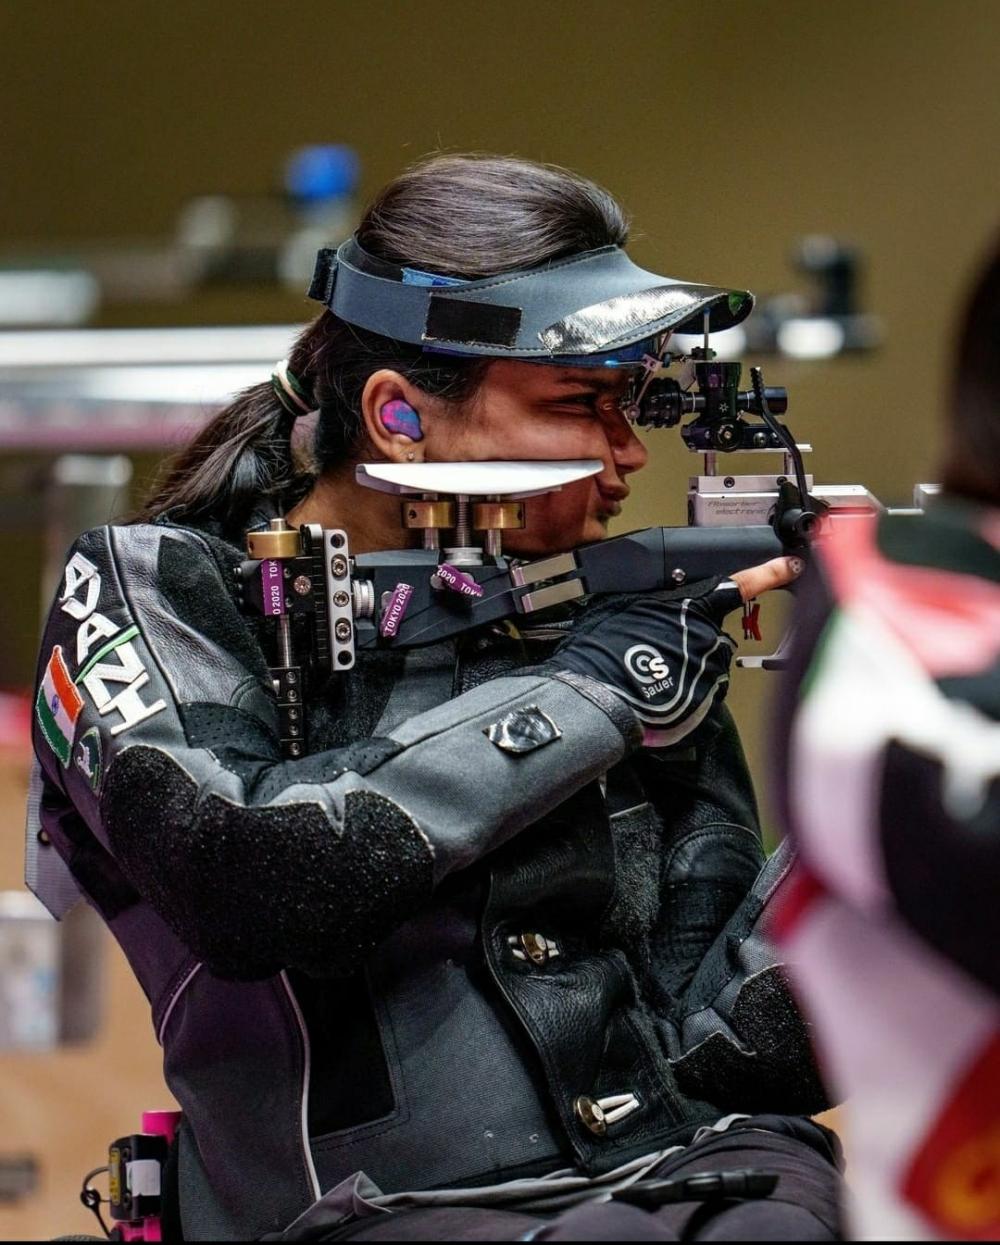 The Weekend Leader - Paralympics: Shooter Avani qualifies for final in 50m 3-positions